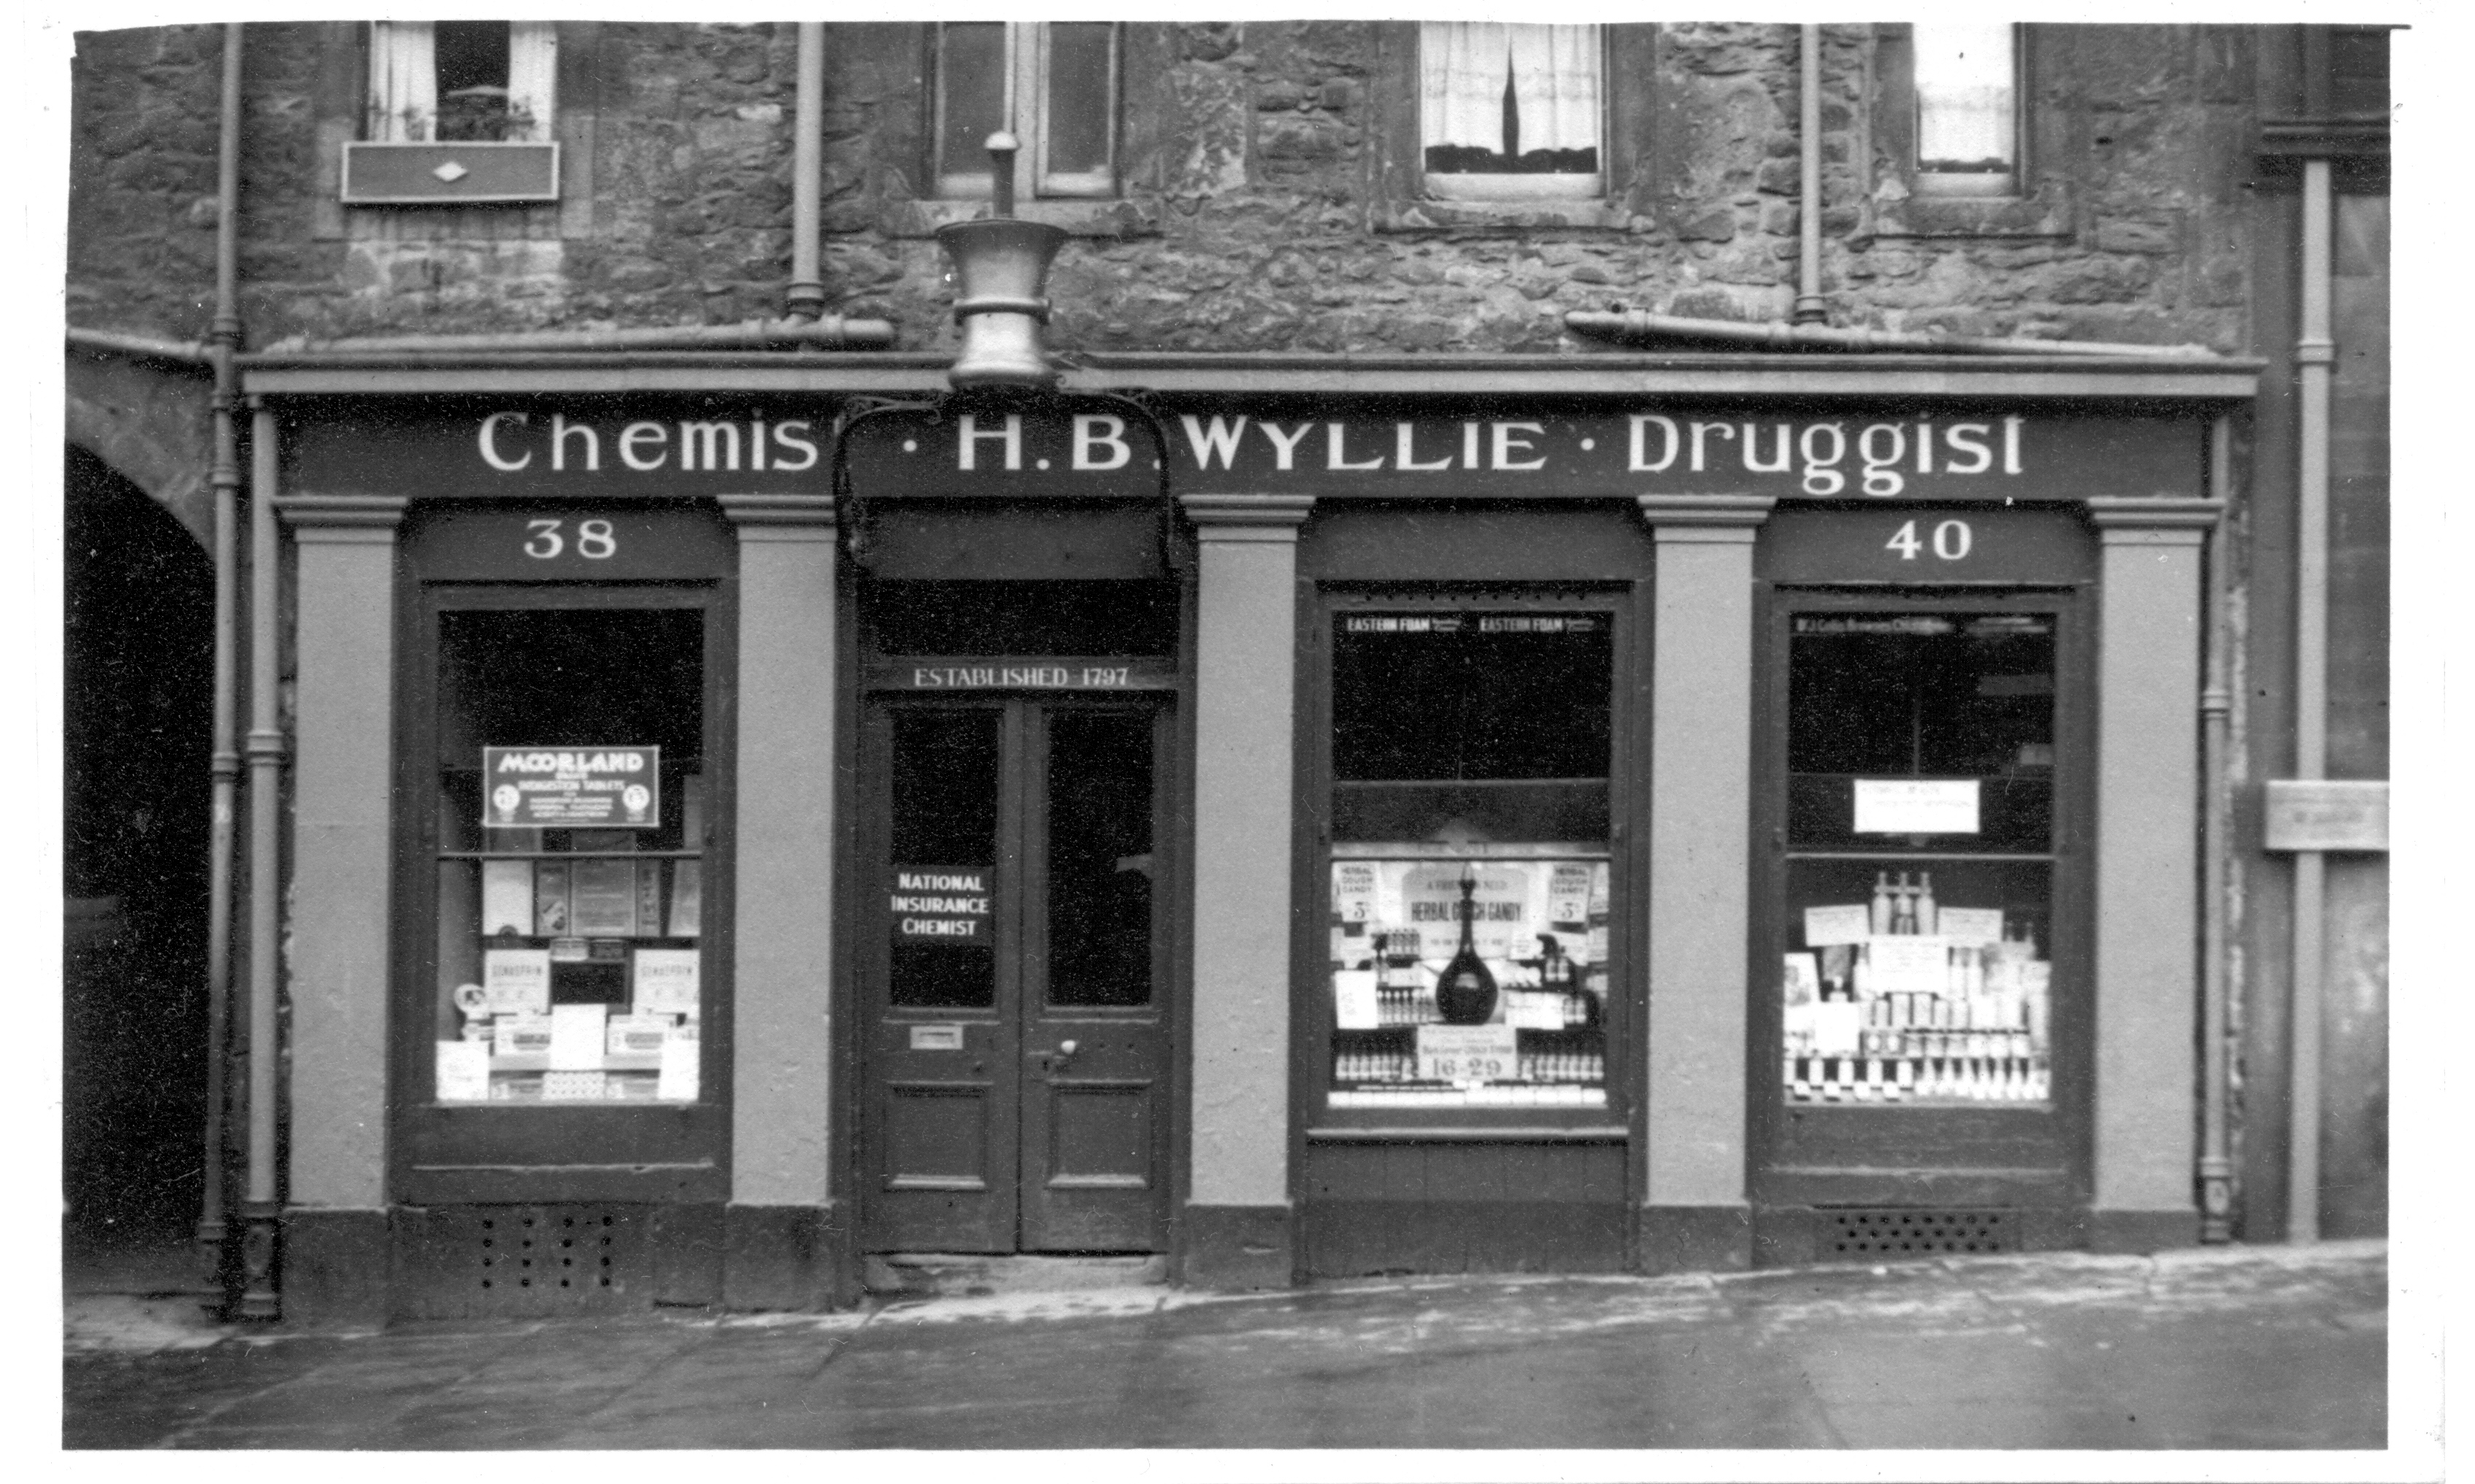 LDRPS: SZ3086, 1953. This black and white photograph shows the exterior of H.B Wyllie, a chemist and druggist in Edinburgh. The business was established in 1797